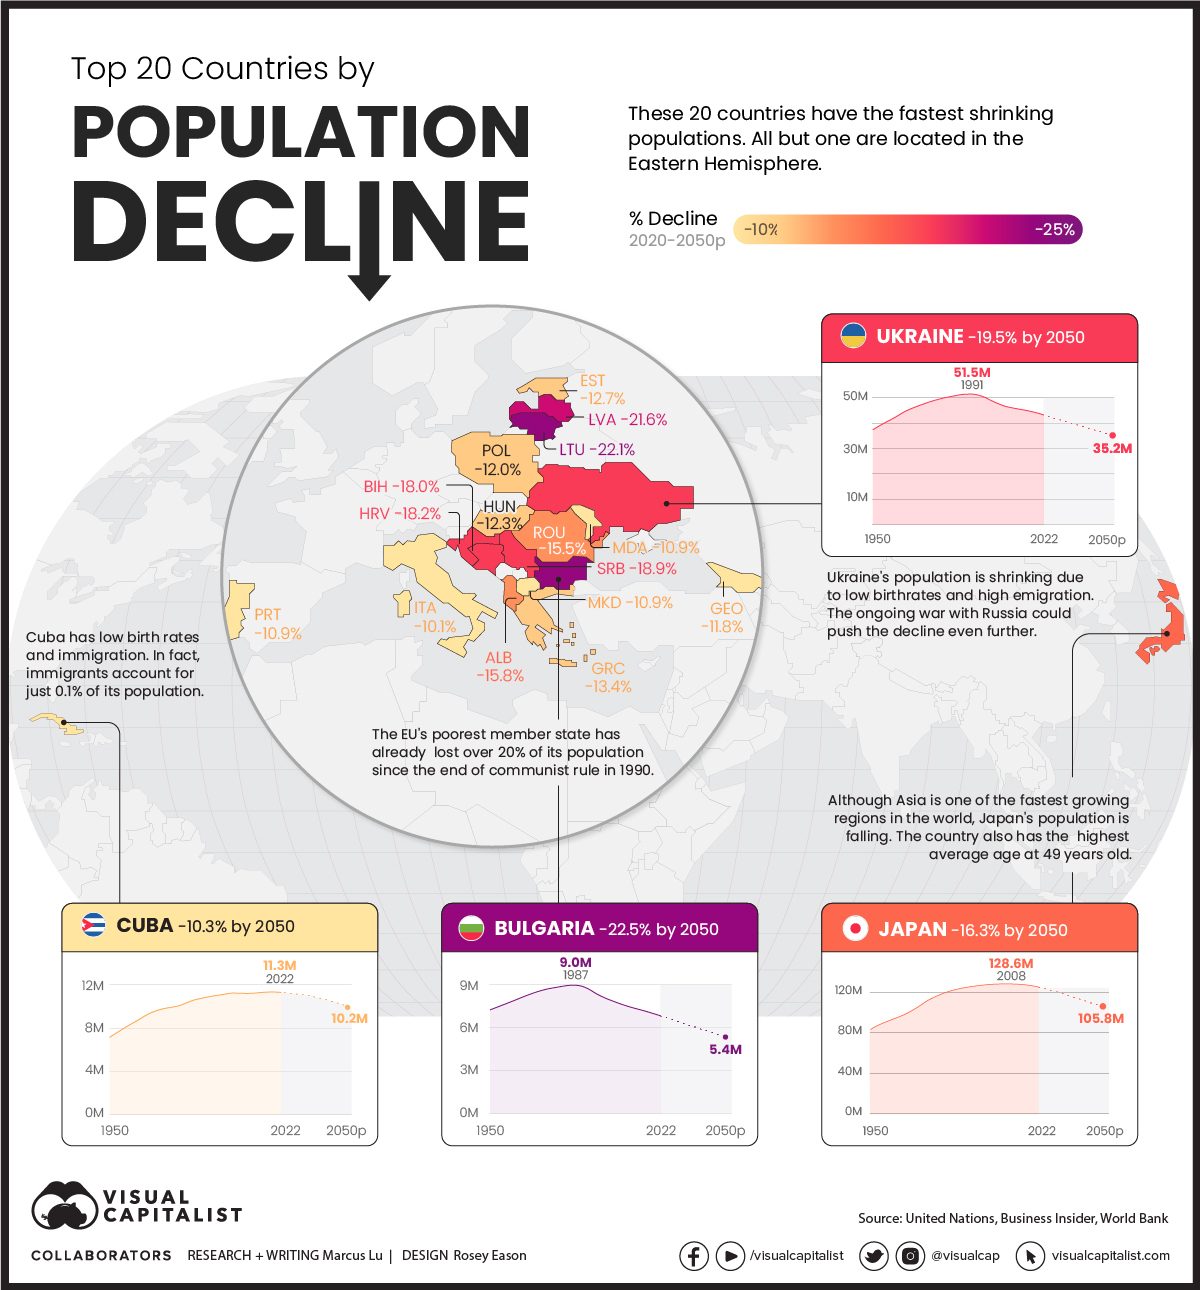 Population decline by country